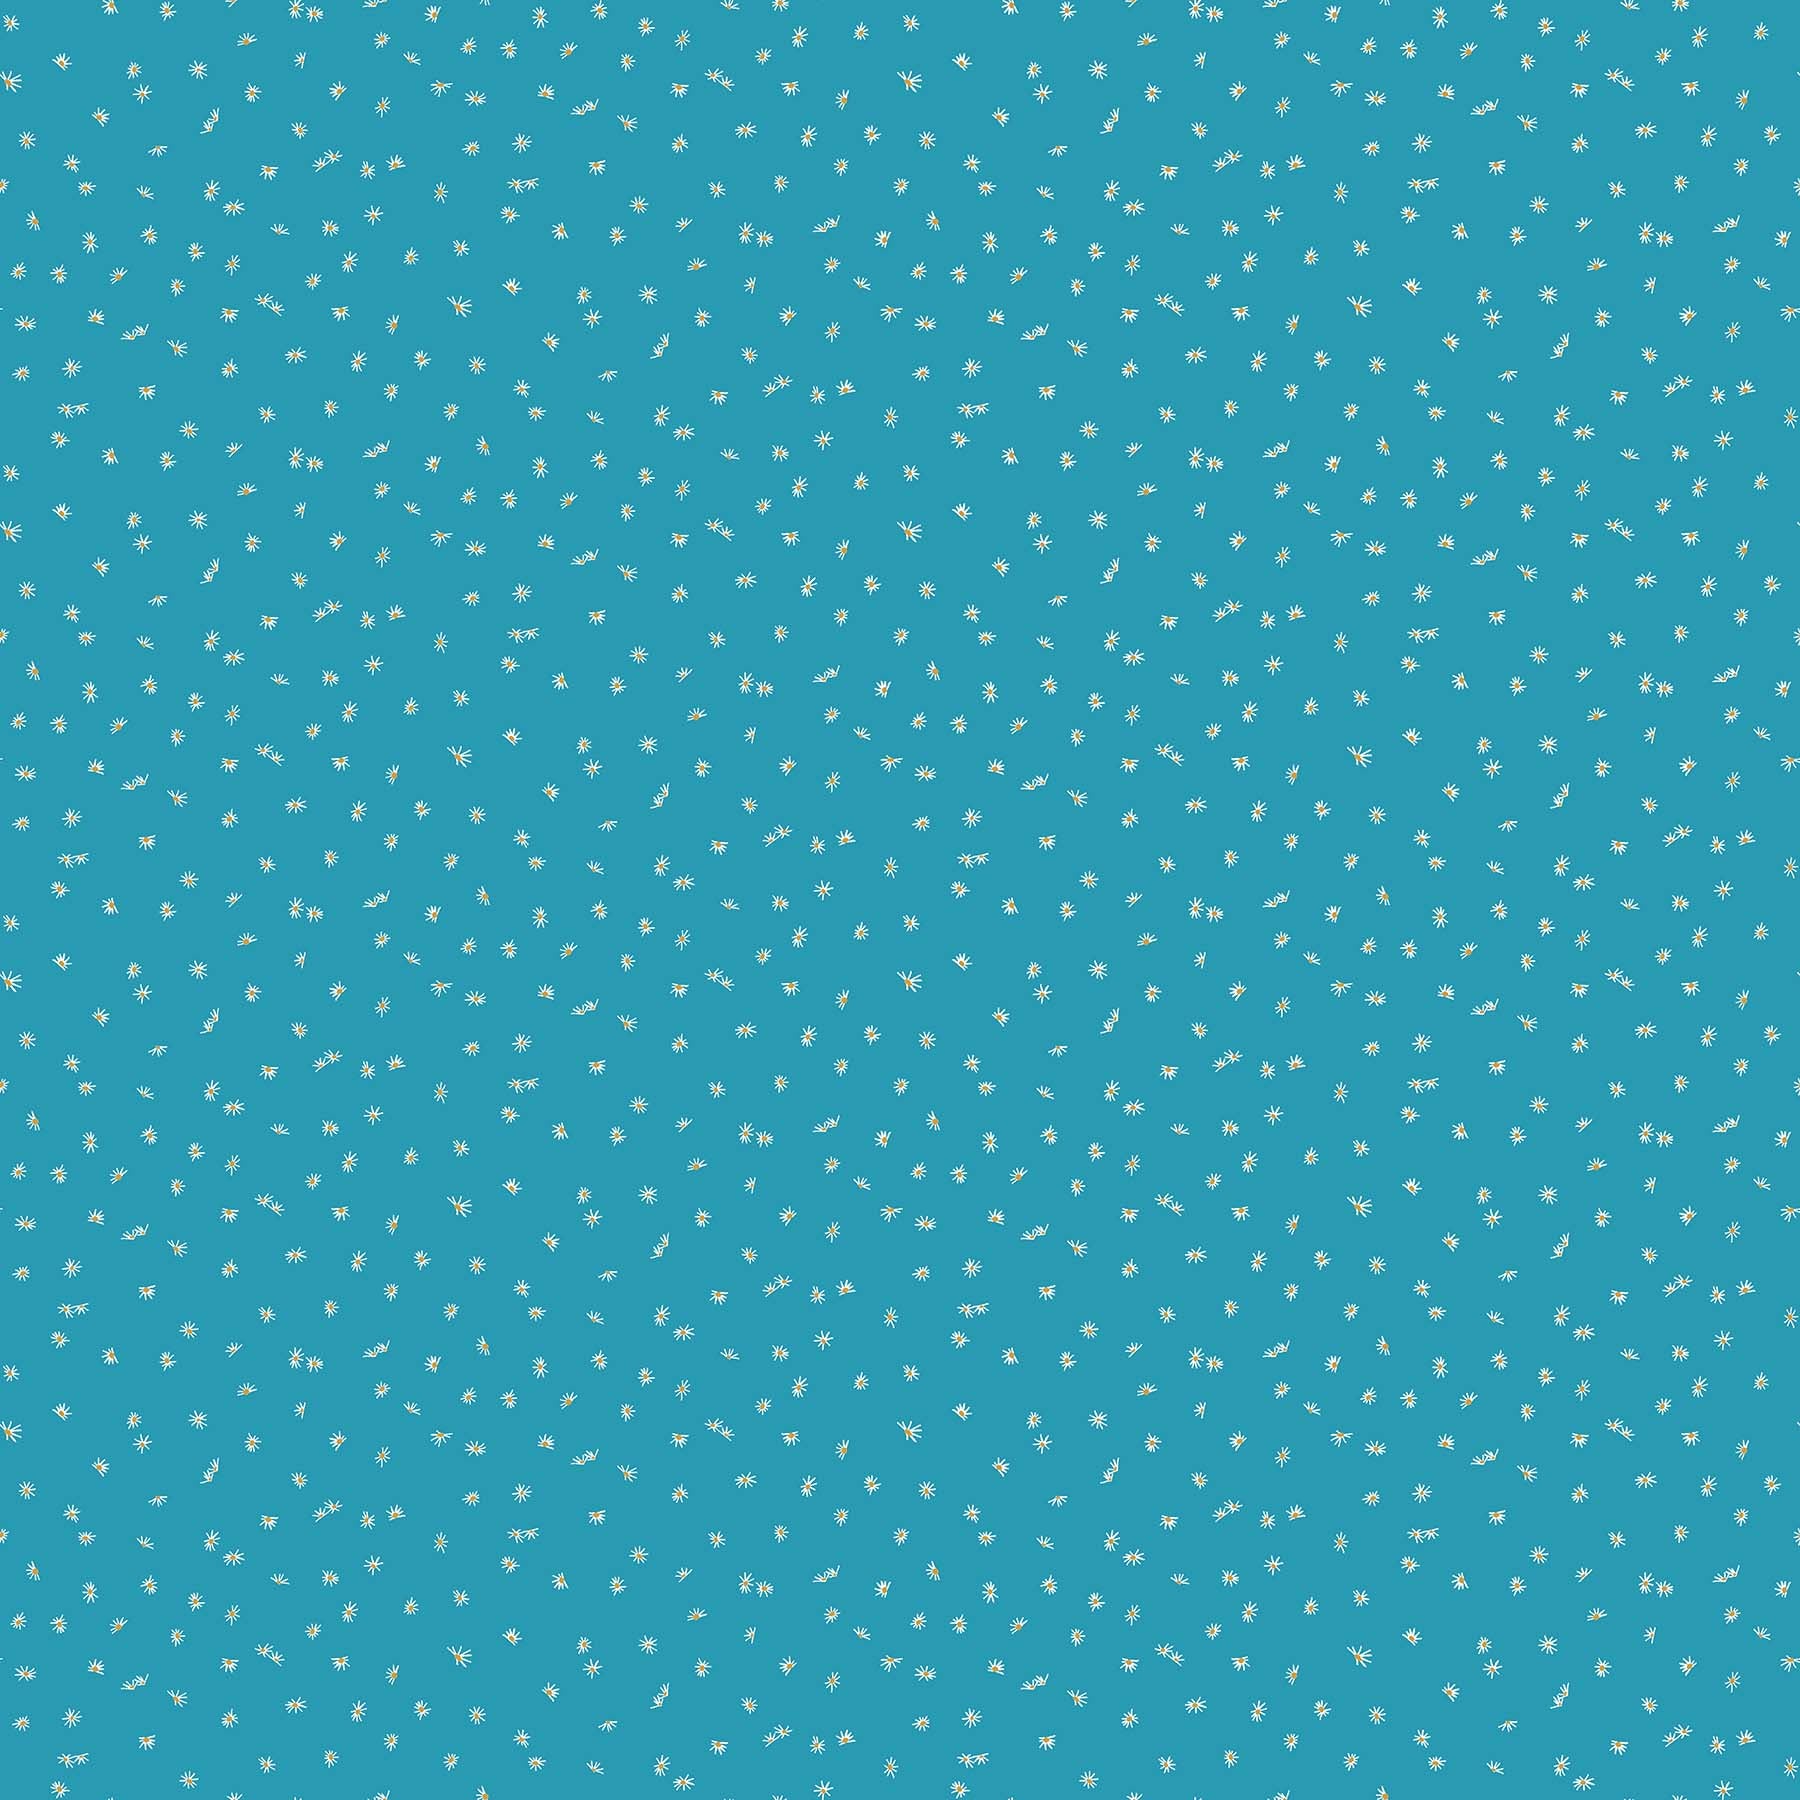 Fabric, Forage, Teal Dandelions 90335 62